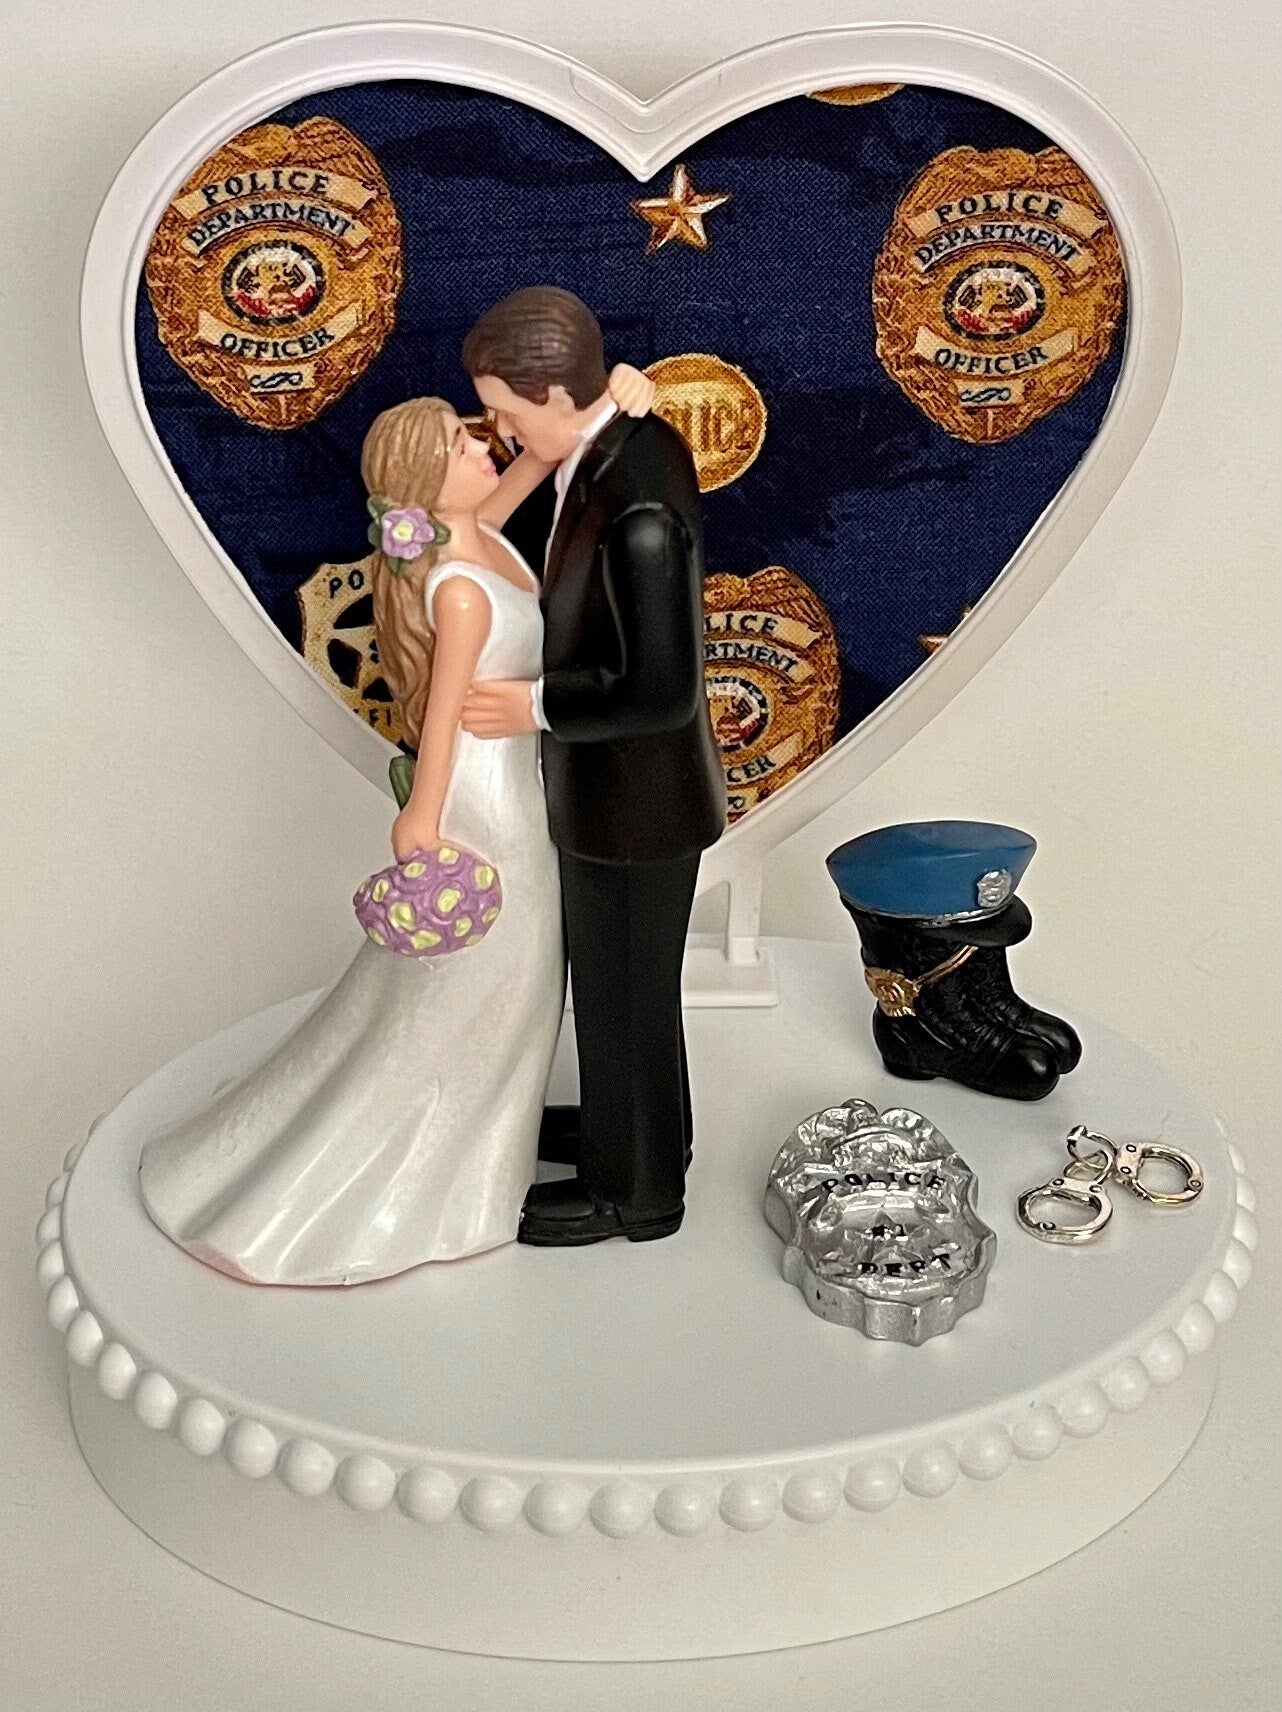 Wedding Cake Topper Police Officer Themed Policeman Handcuffs Badge Gorgeous Long-Haired Bride Groom Heart Bridal Shower Reception Gift Idea